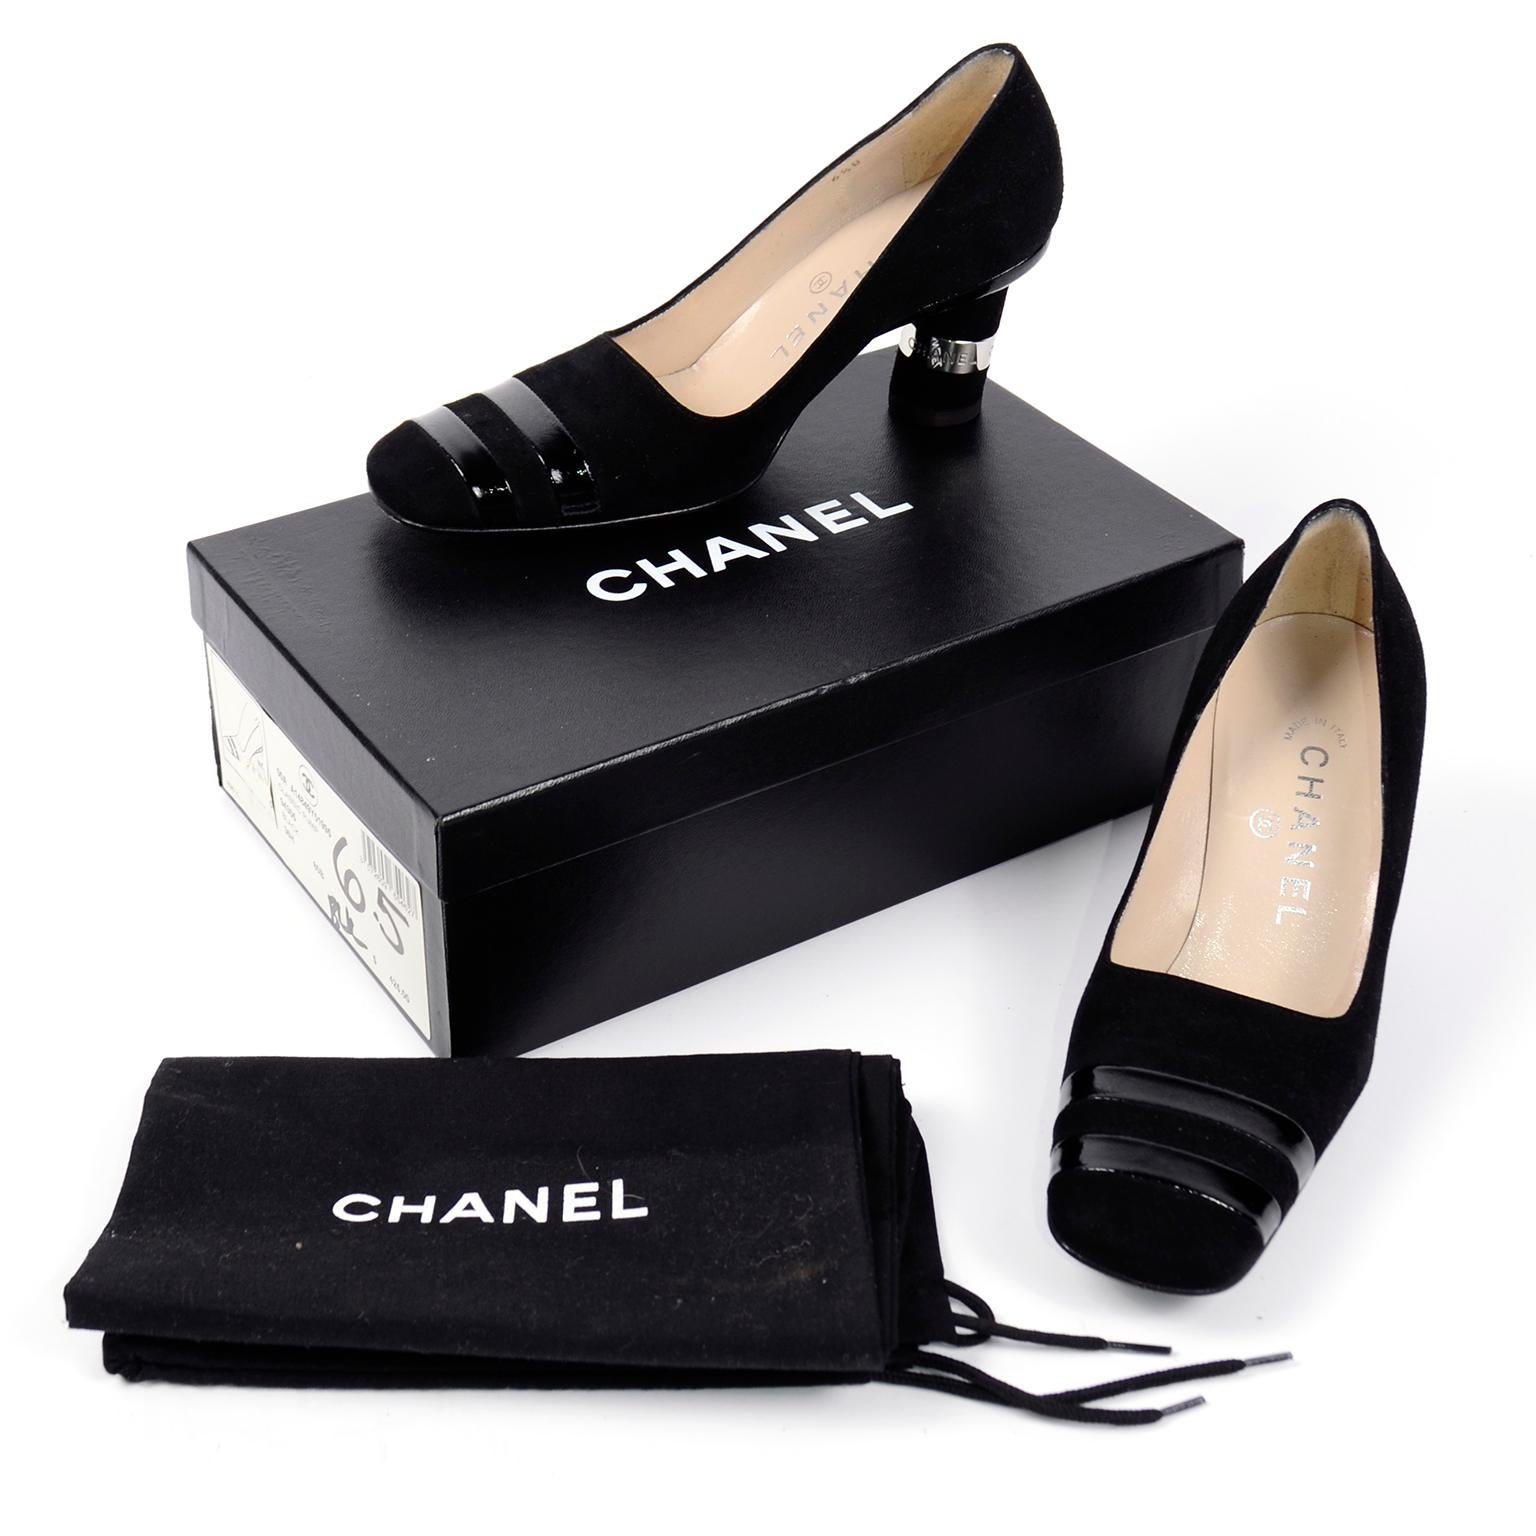 These vintage Chanel Autumn Winter 2000 black suede pumps have fabulous cylindrical block heels with Chanel marked silver metal bands. There are two horizontal patent leather bands across the toe boxes and the shoes have a gently squared toe. These